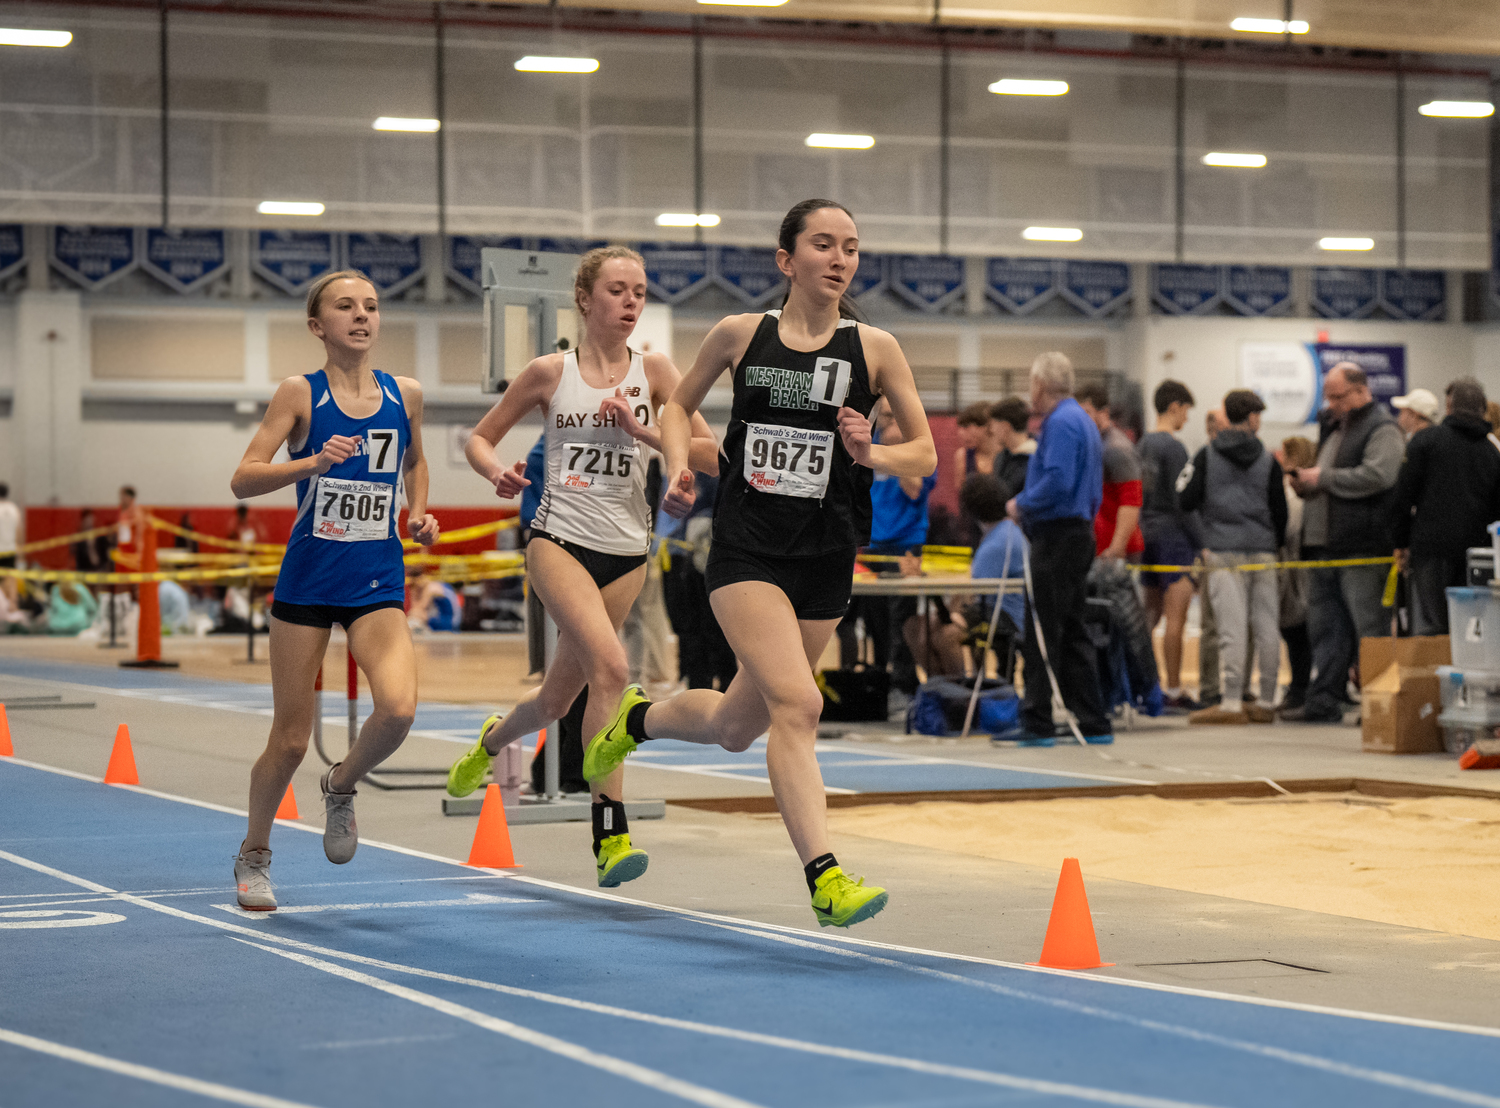 Lily Strebel running in the 1,500-meter race at the Section XI Championships earlier this month. She won the 1,000-meter race at the Long Island Elite Meet this past Saturday.  RON ESPOSITO